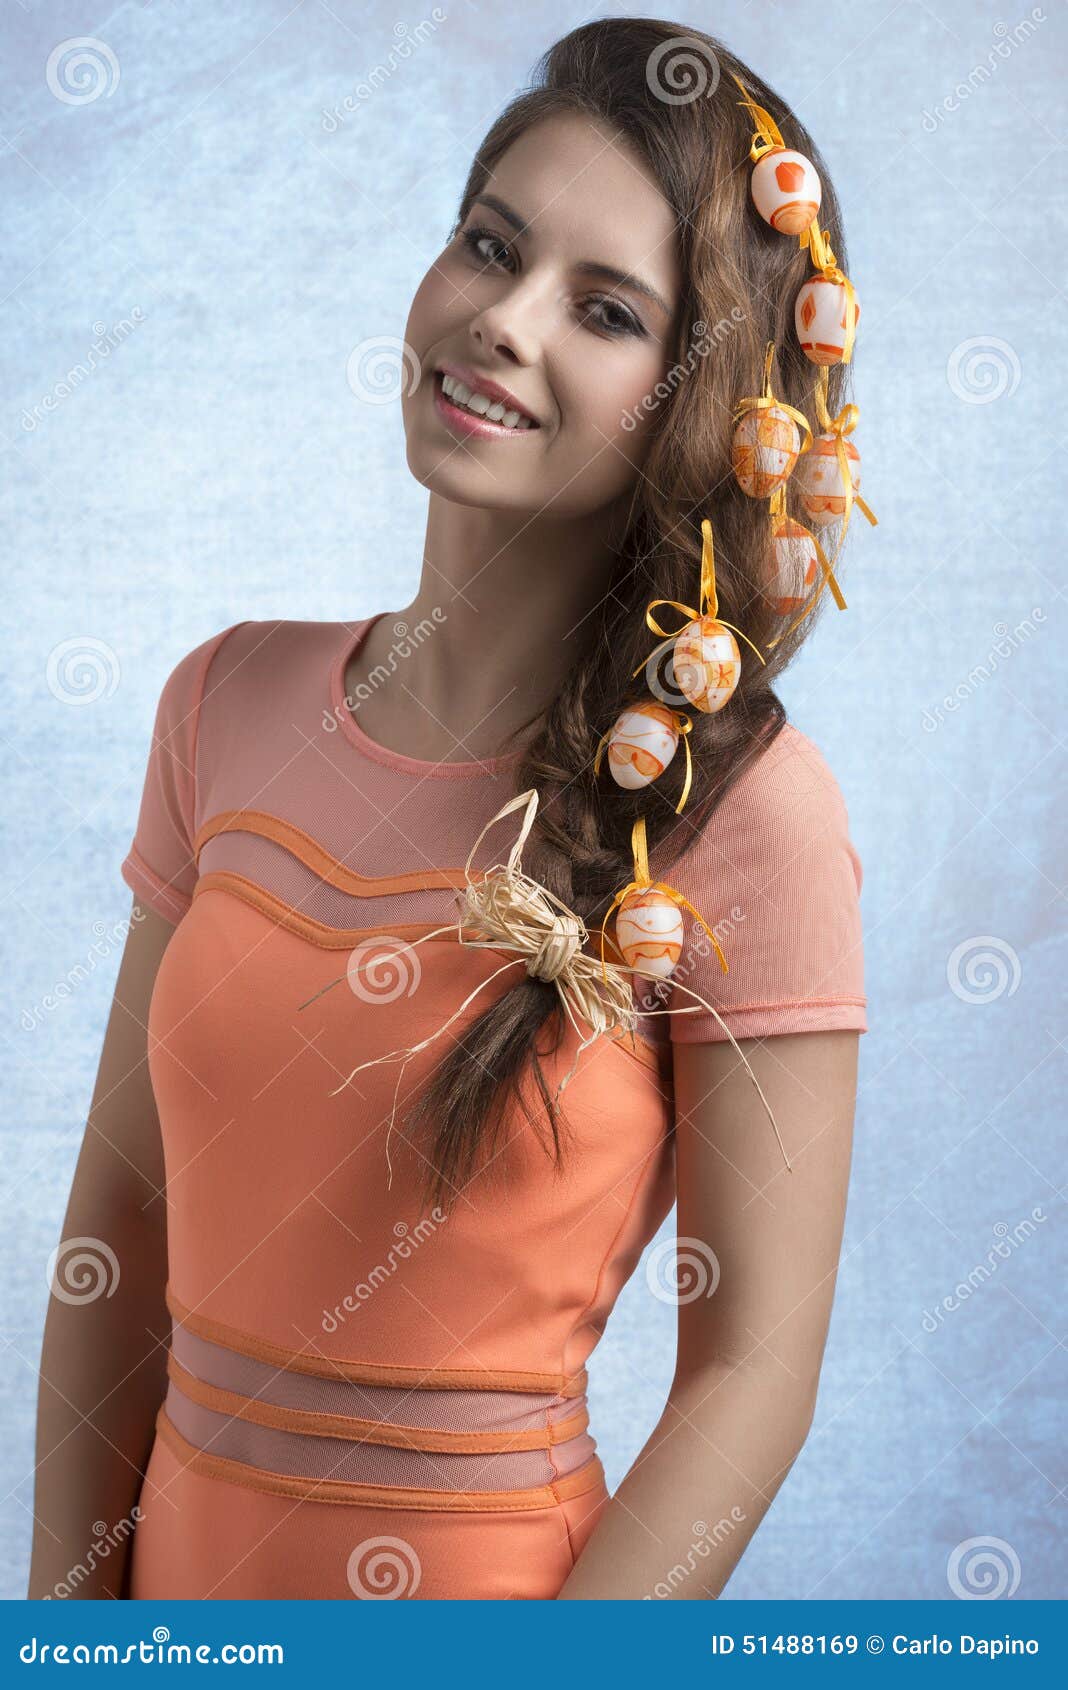 1,817 Girl Easter Hair Style Stock Photos - Free & Royalty-Free Stock Photos  from Dreamstime